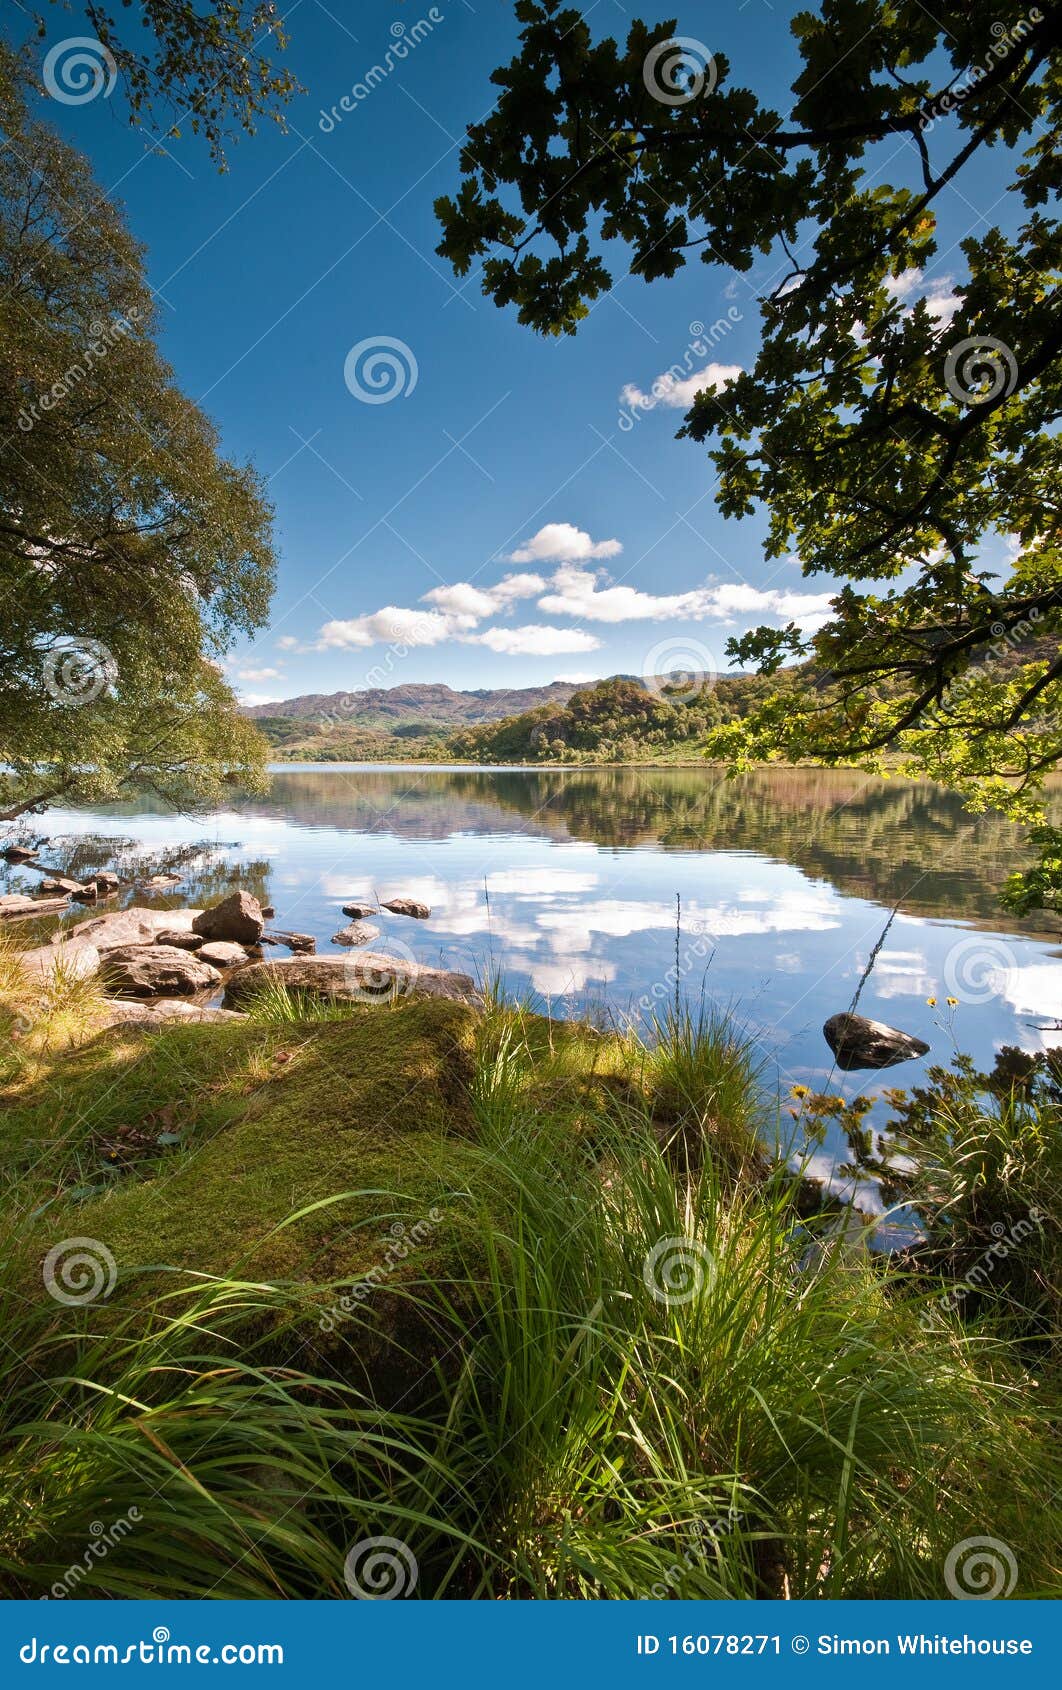 Welsh Lake stock image. Image of natural, colorful, forest - 16078271